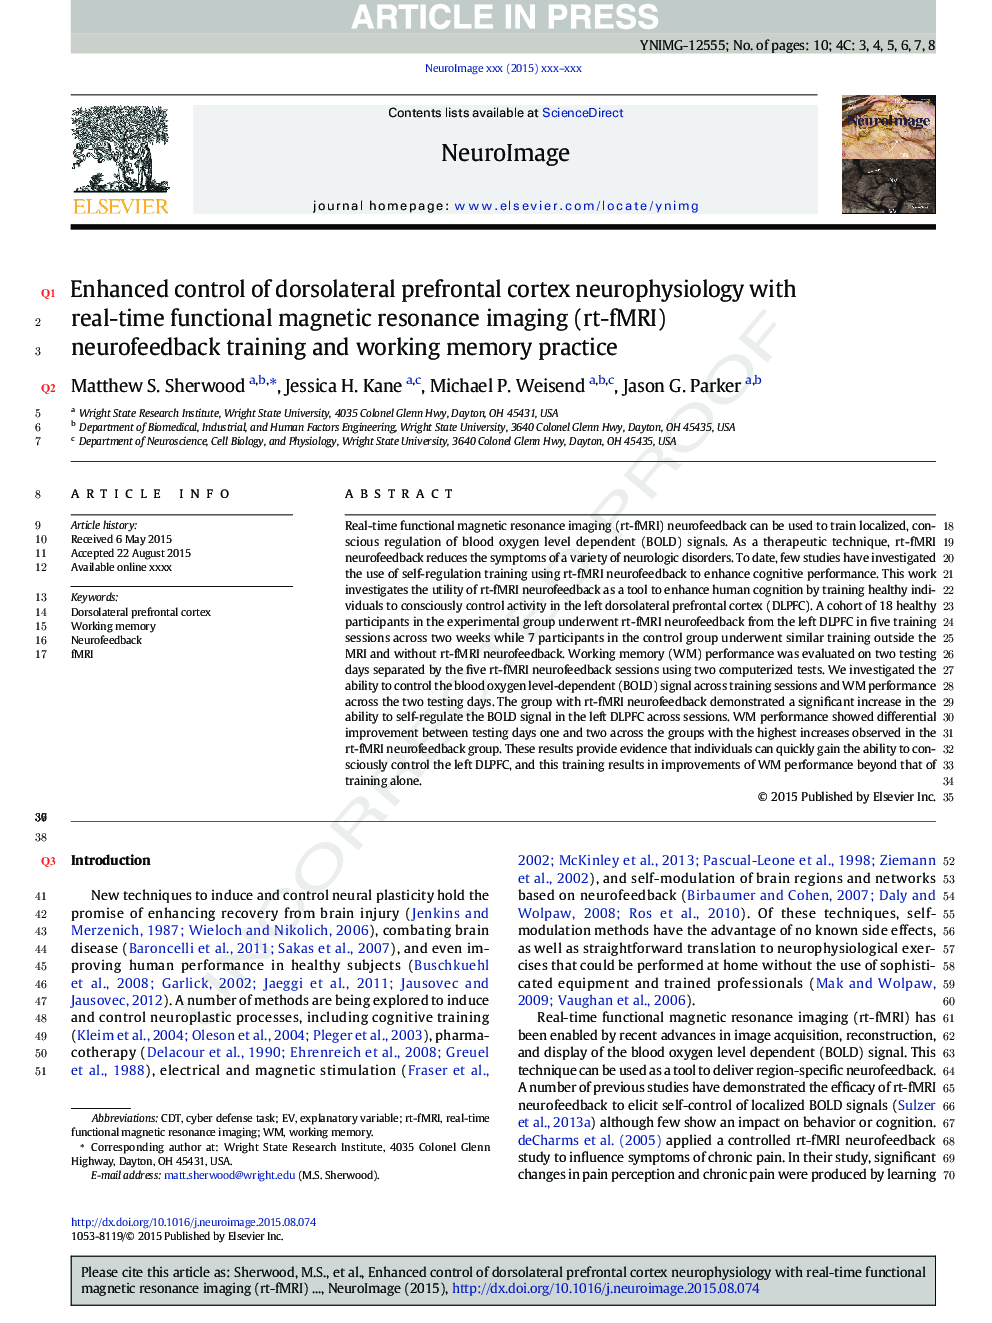 Enhanced control of dorsolateral prefrontal cortex neurophysiology with real-time functional magnetic resonance imaging (rt-fMRI) neurofeedback training and working memory practice